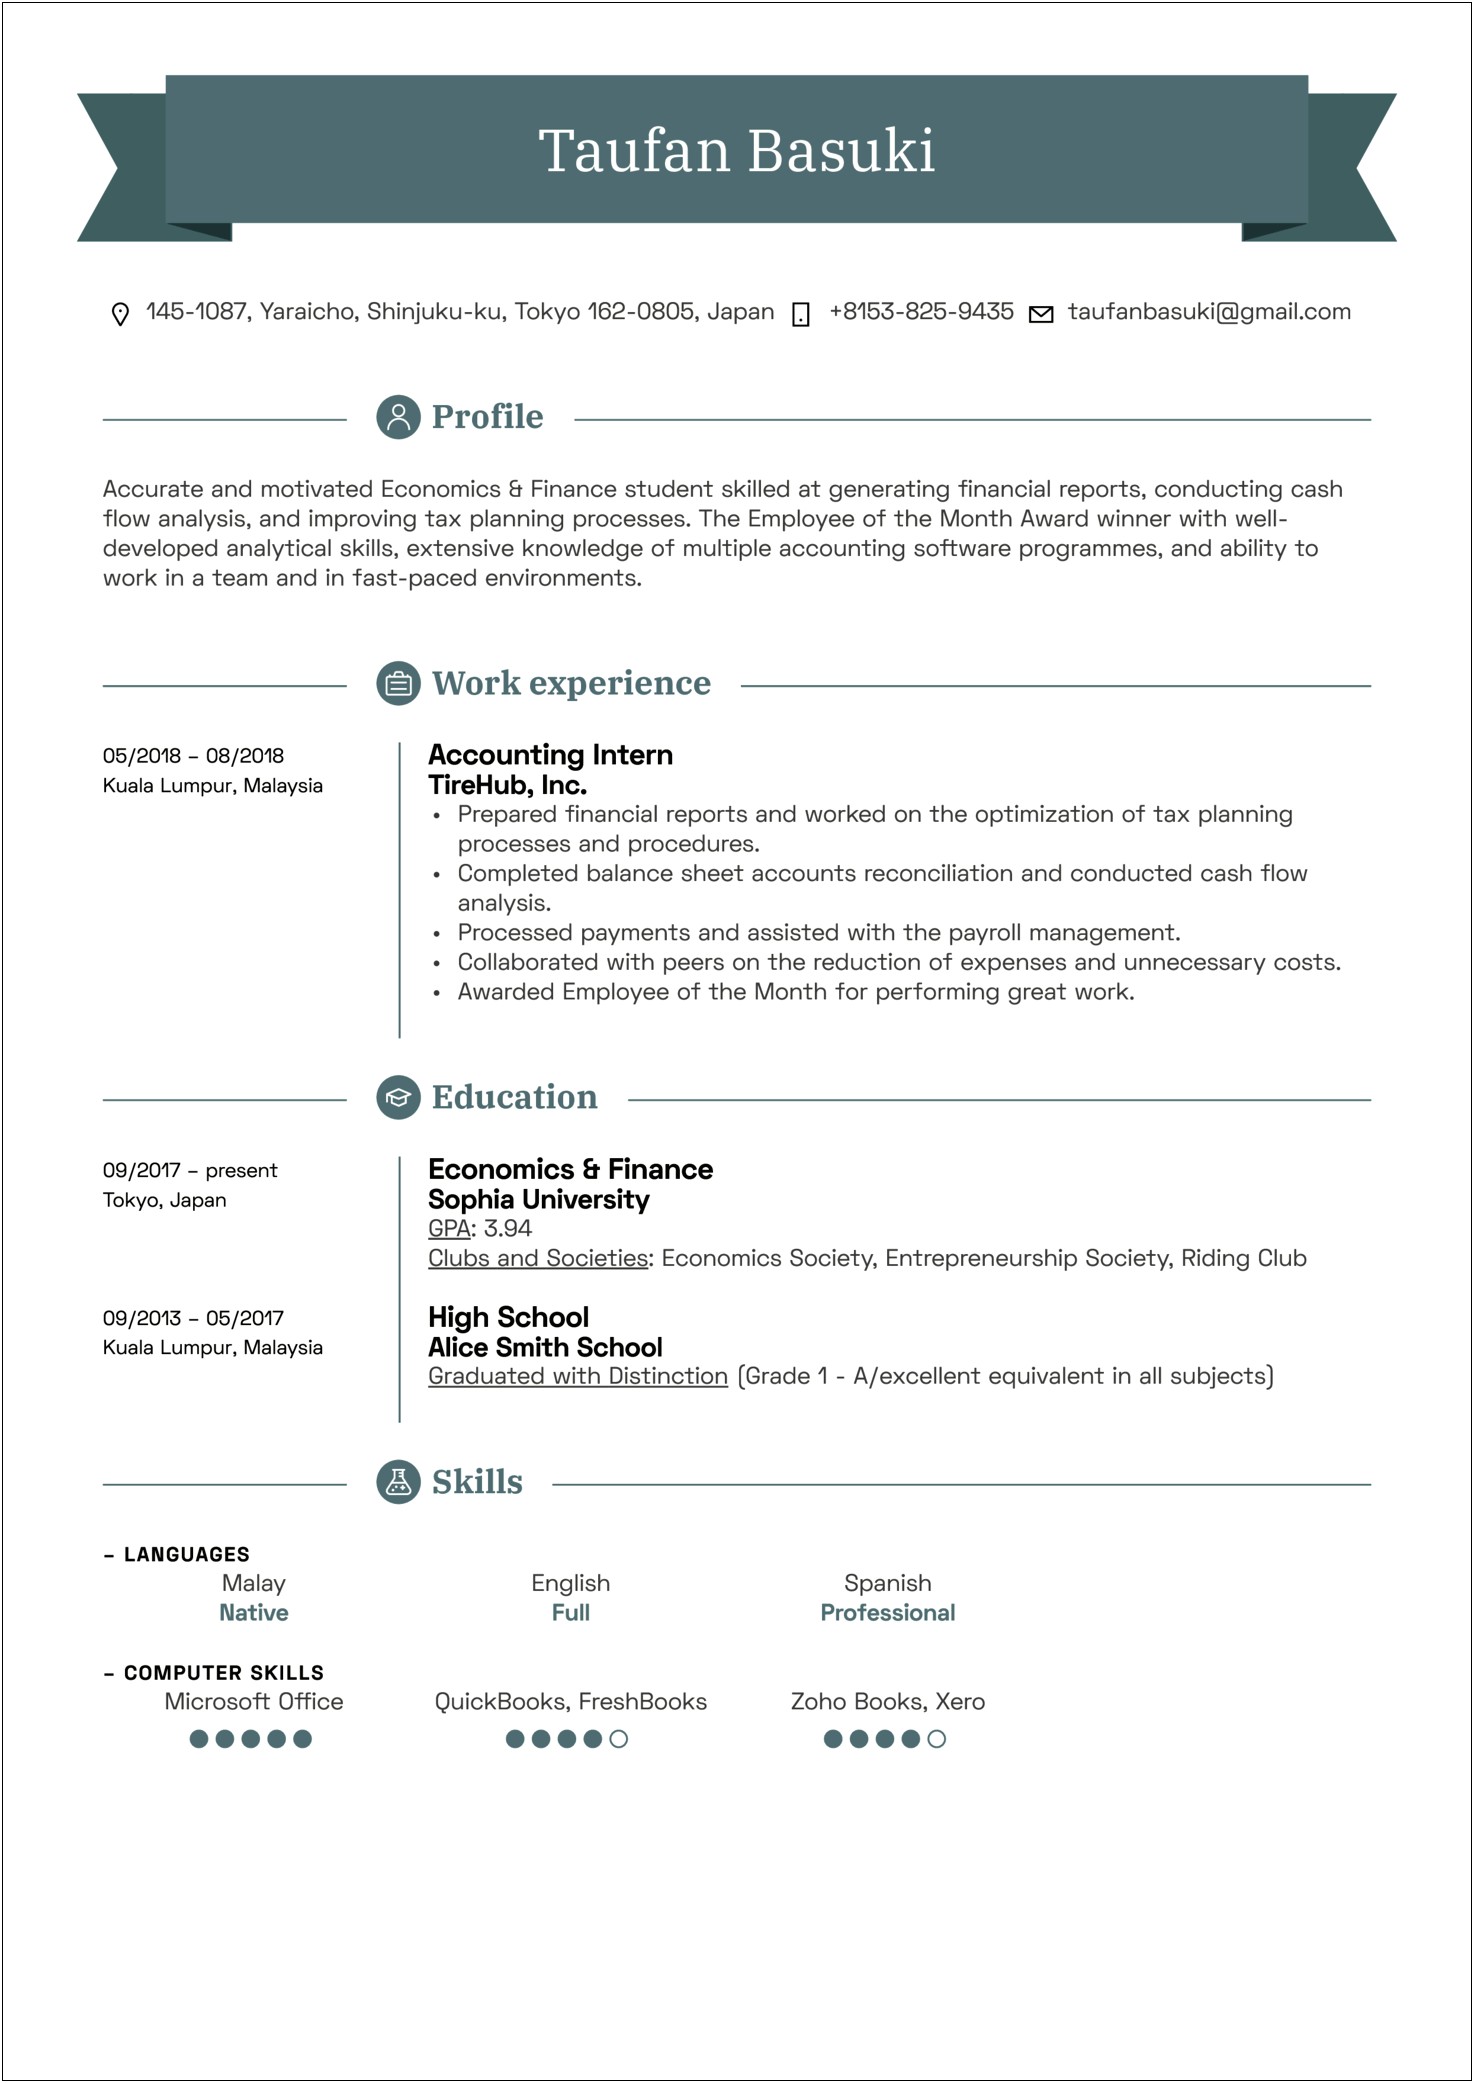 Resume Objective For Accounting Intern